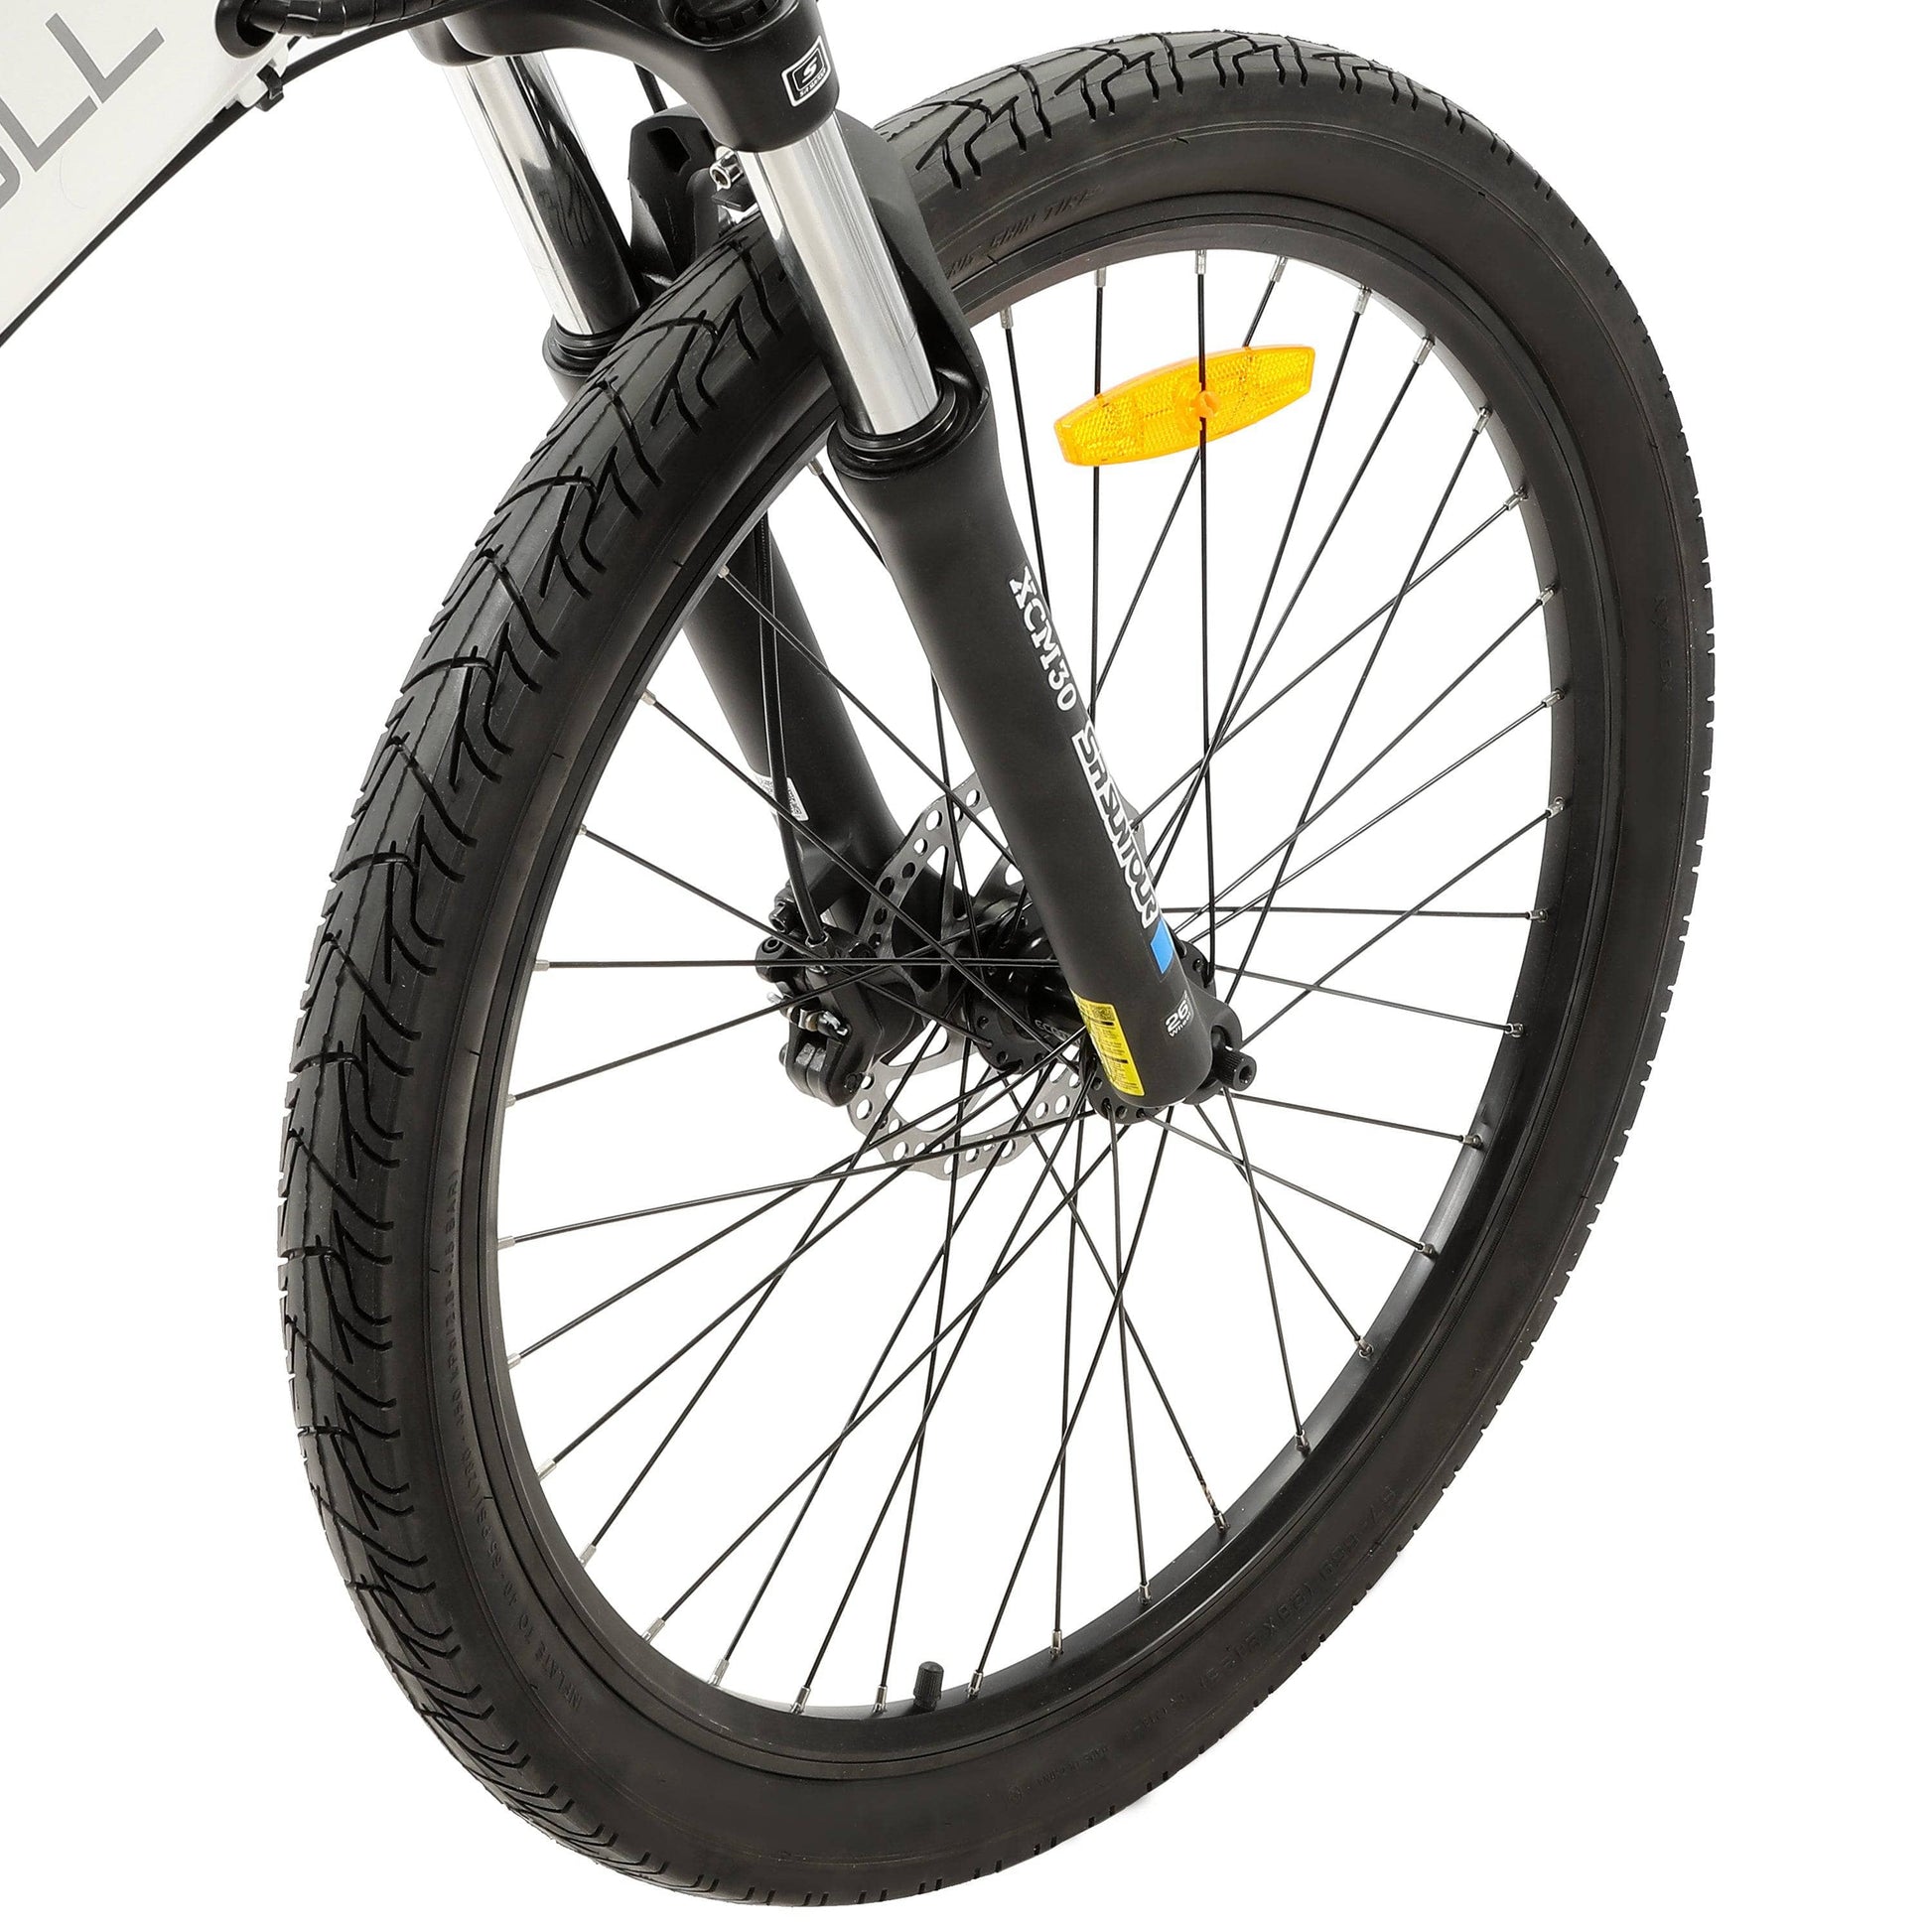 Ecotric Electric Bikes Ecotric Seagull 26" 48V 1000W Electric Mountain Bike